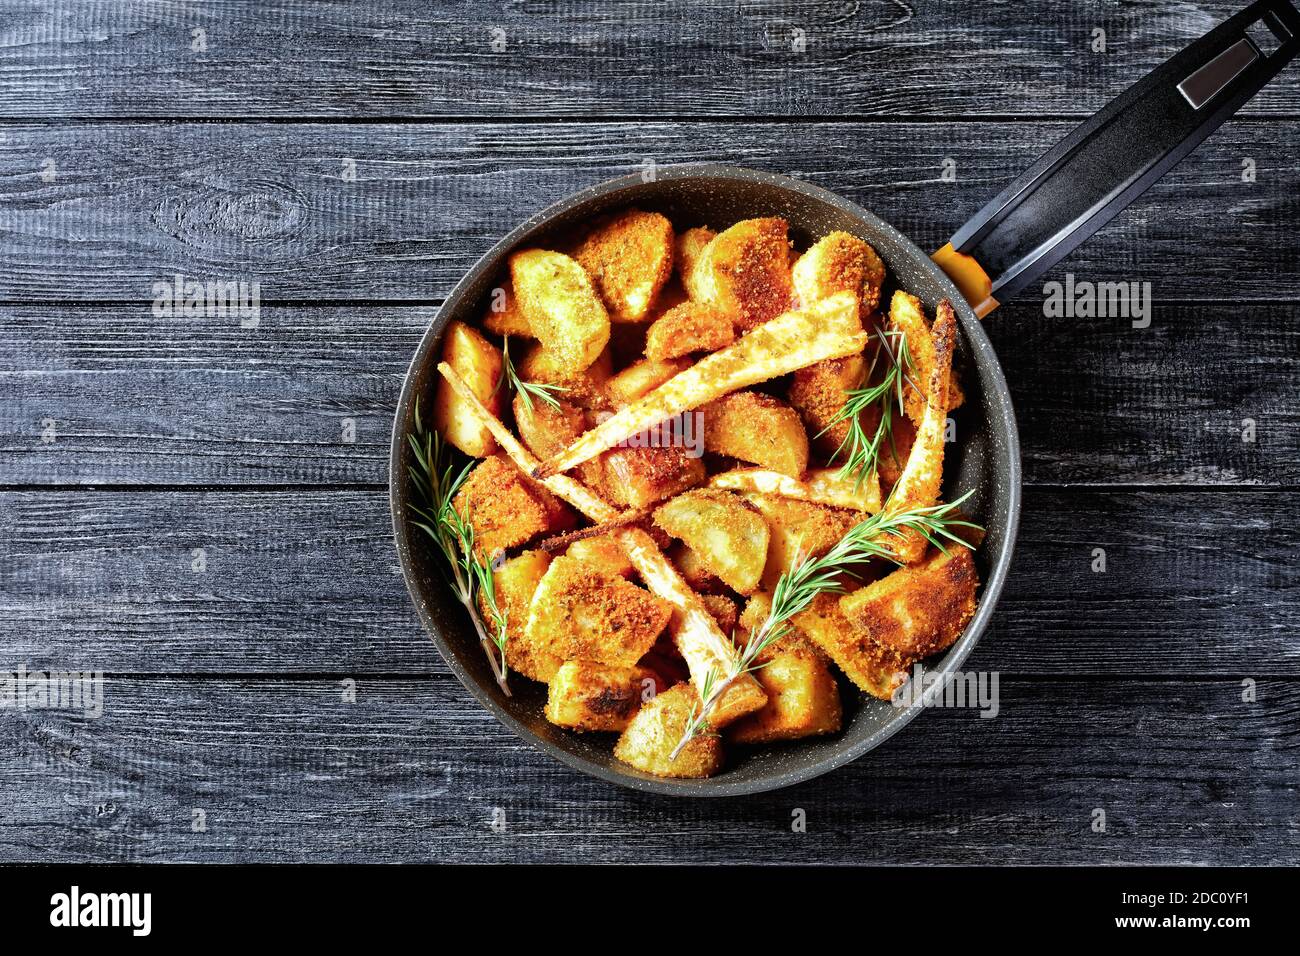 Oven baked root vegetables: parsnip and potato wedges breaded in  breadcrumbs with smoked paprika and fresh rosemary sprigs served on a  wooden backgrou Stock Photo - Alamy